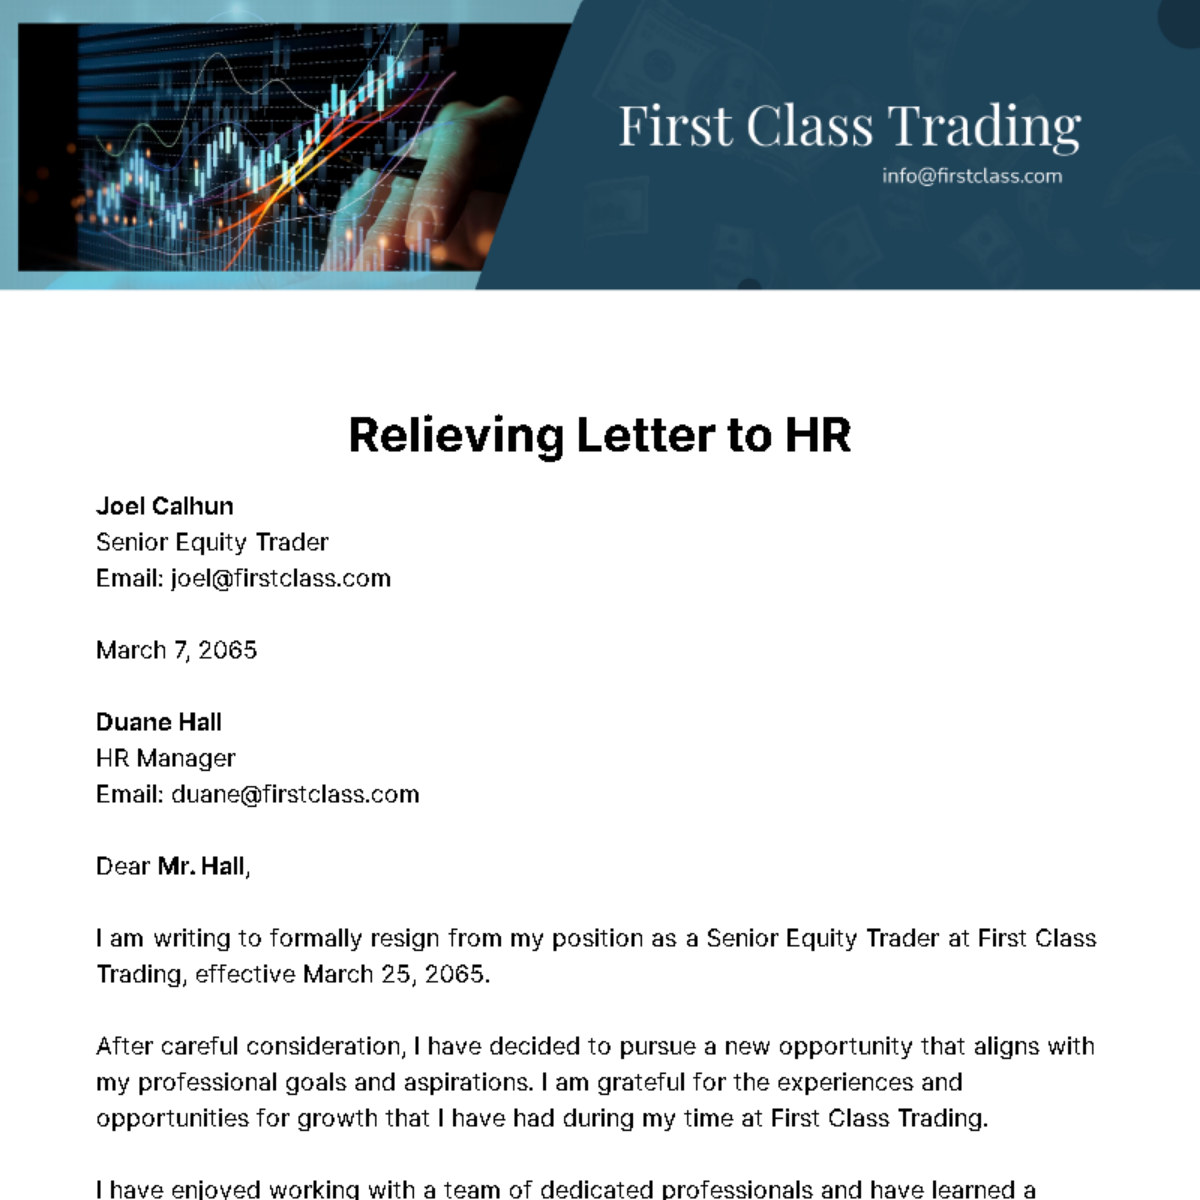 Relieving Letter to HR Template